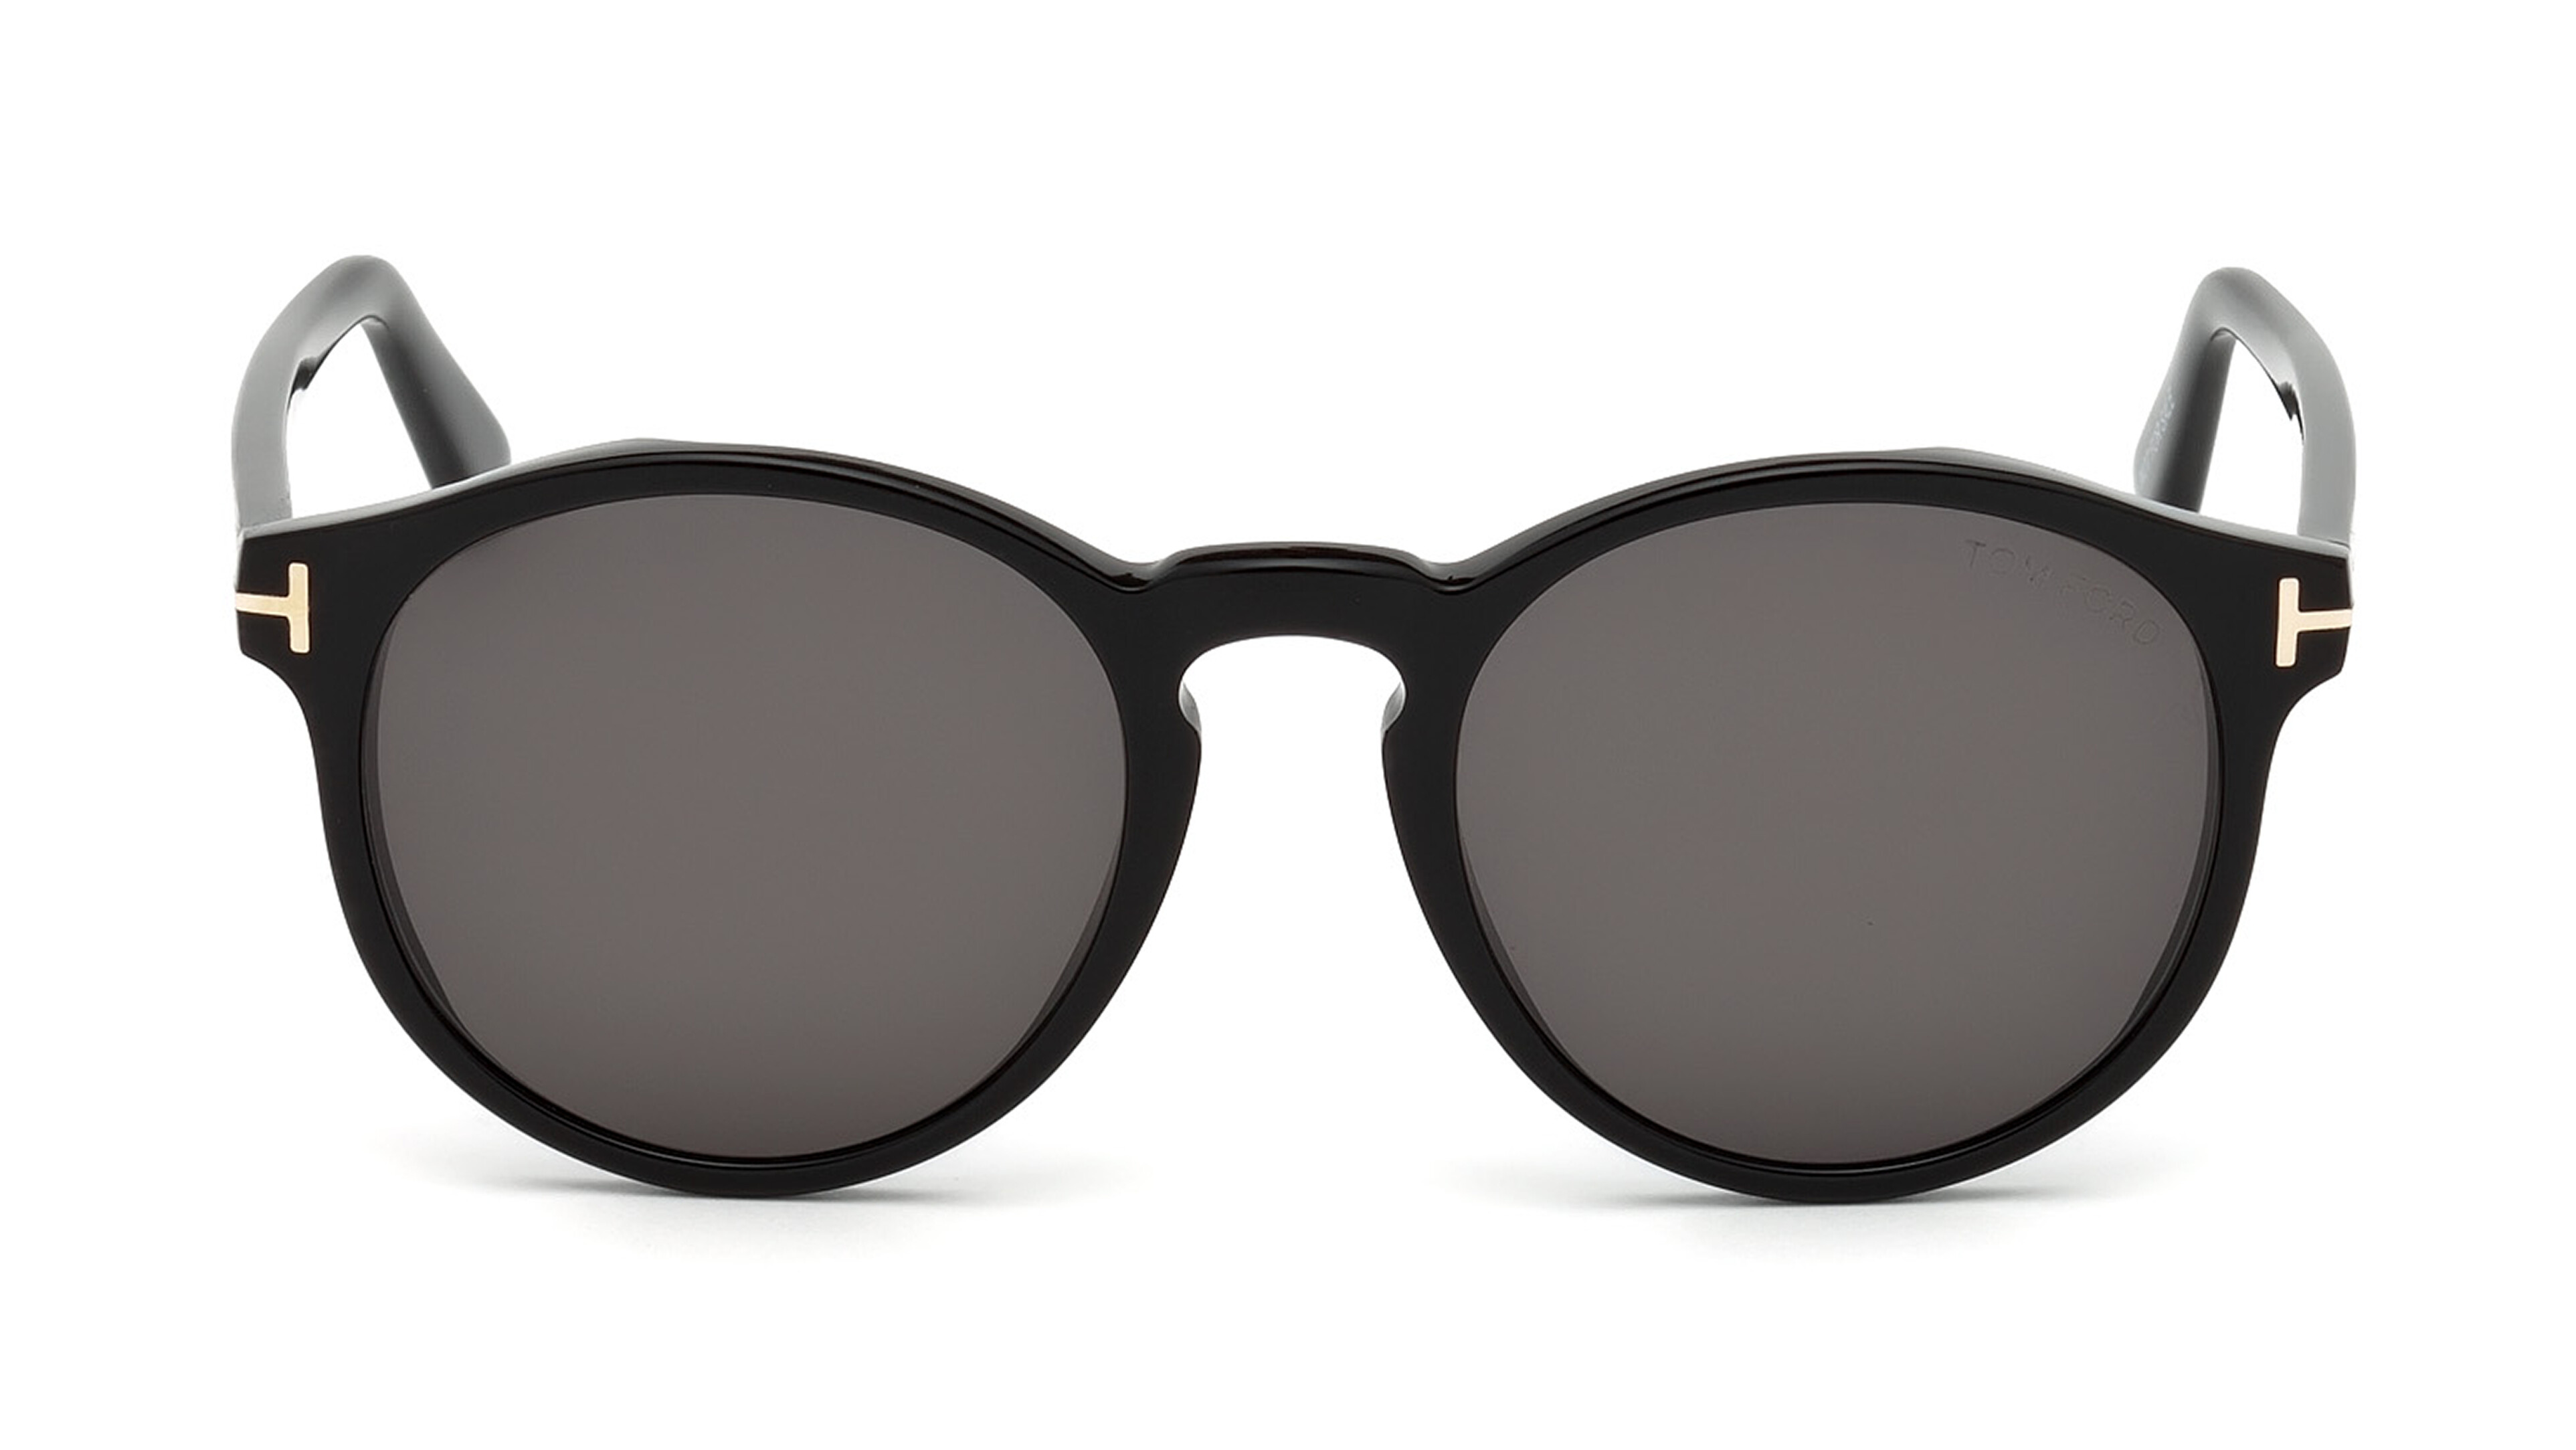 [products.image.front] Tom Ford FT0591 01A Sonnenbrille